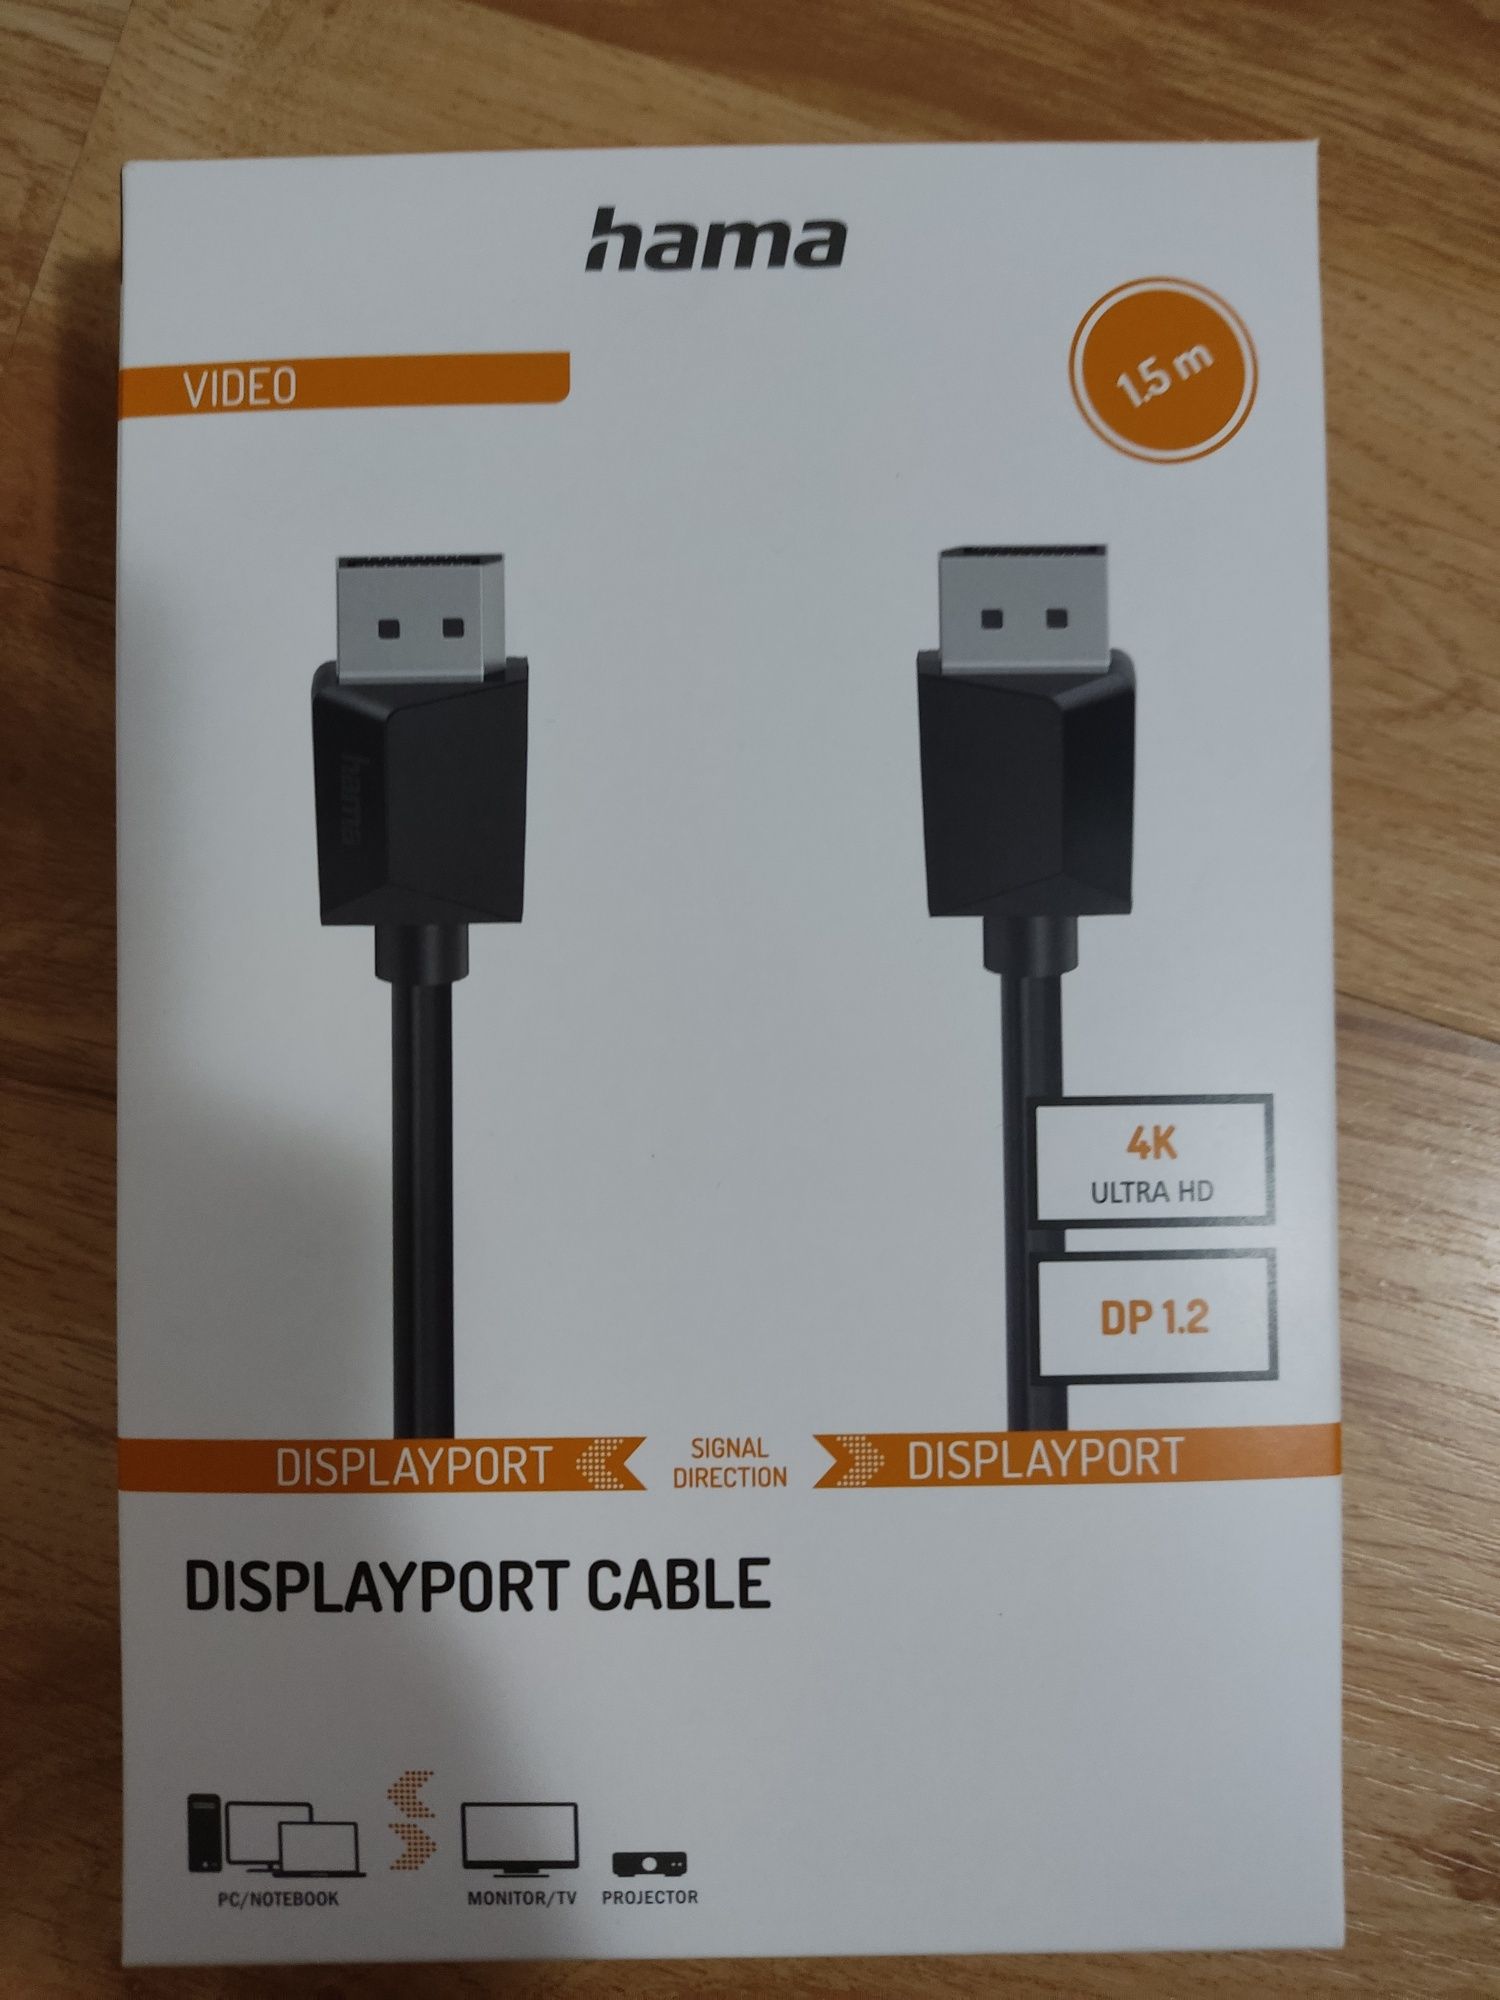 Display port cable (DP 1.2)